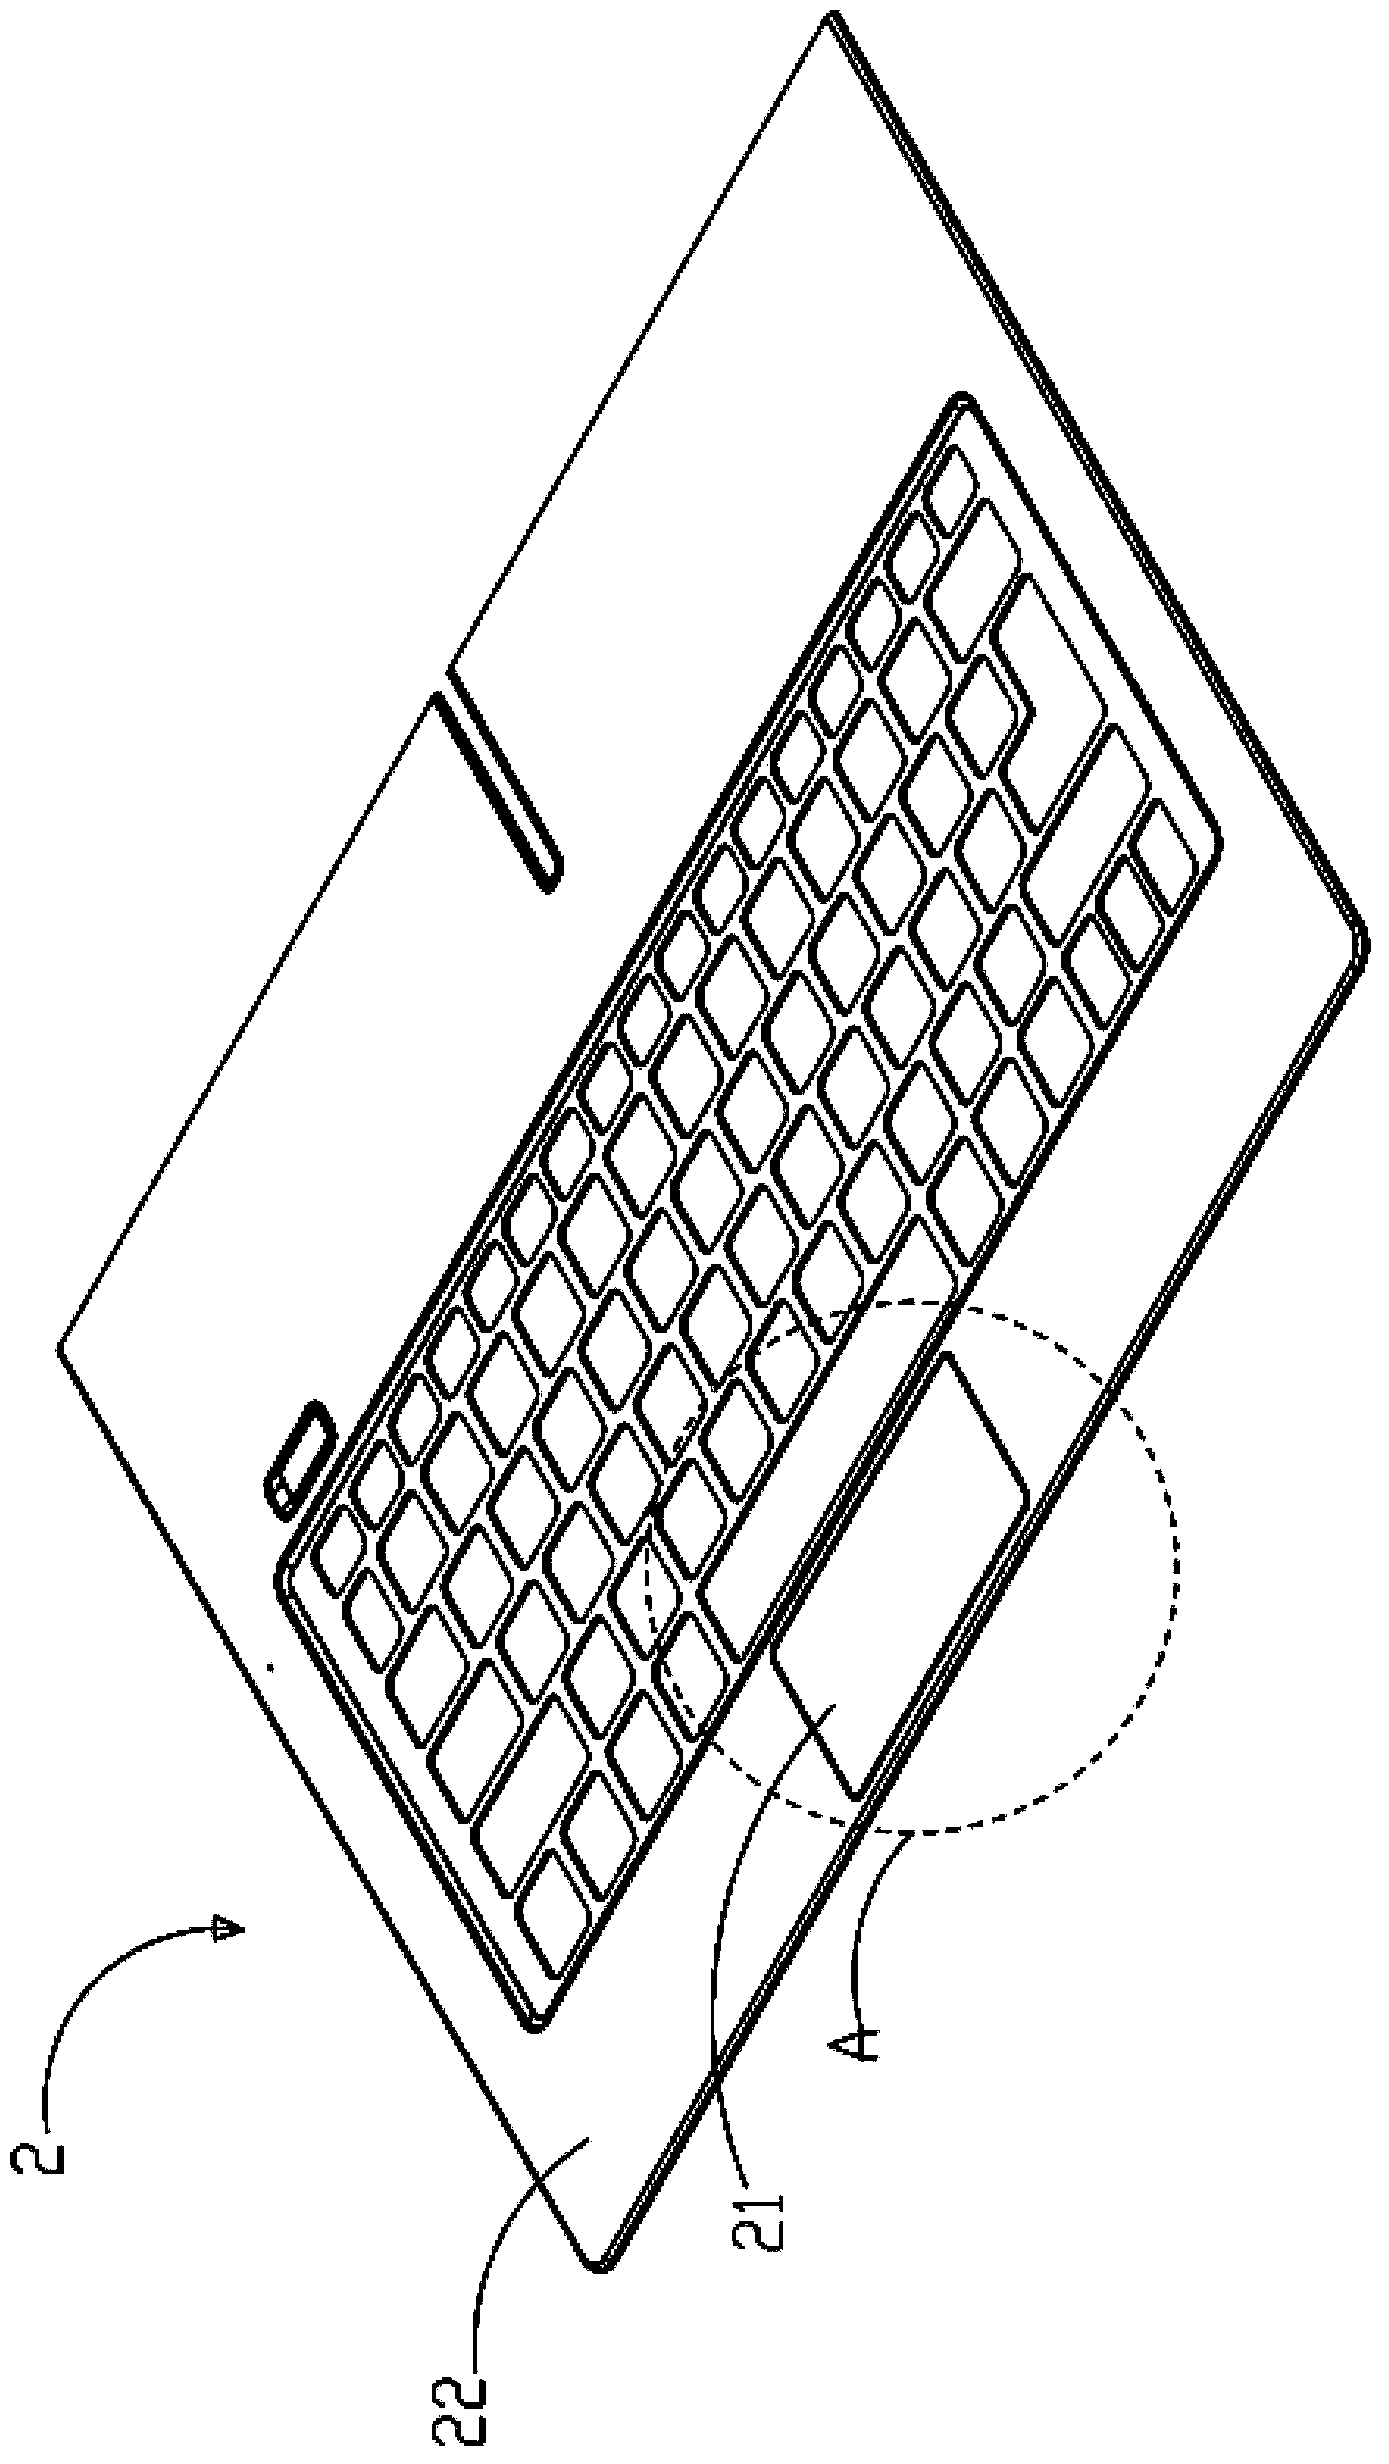 Key control device for click pad